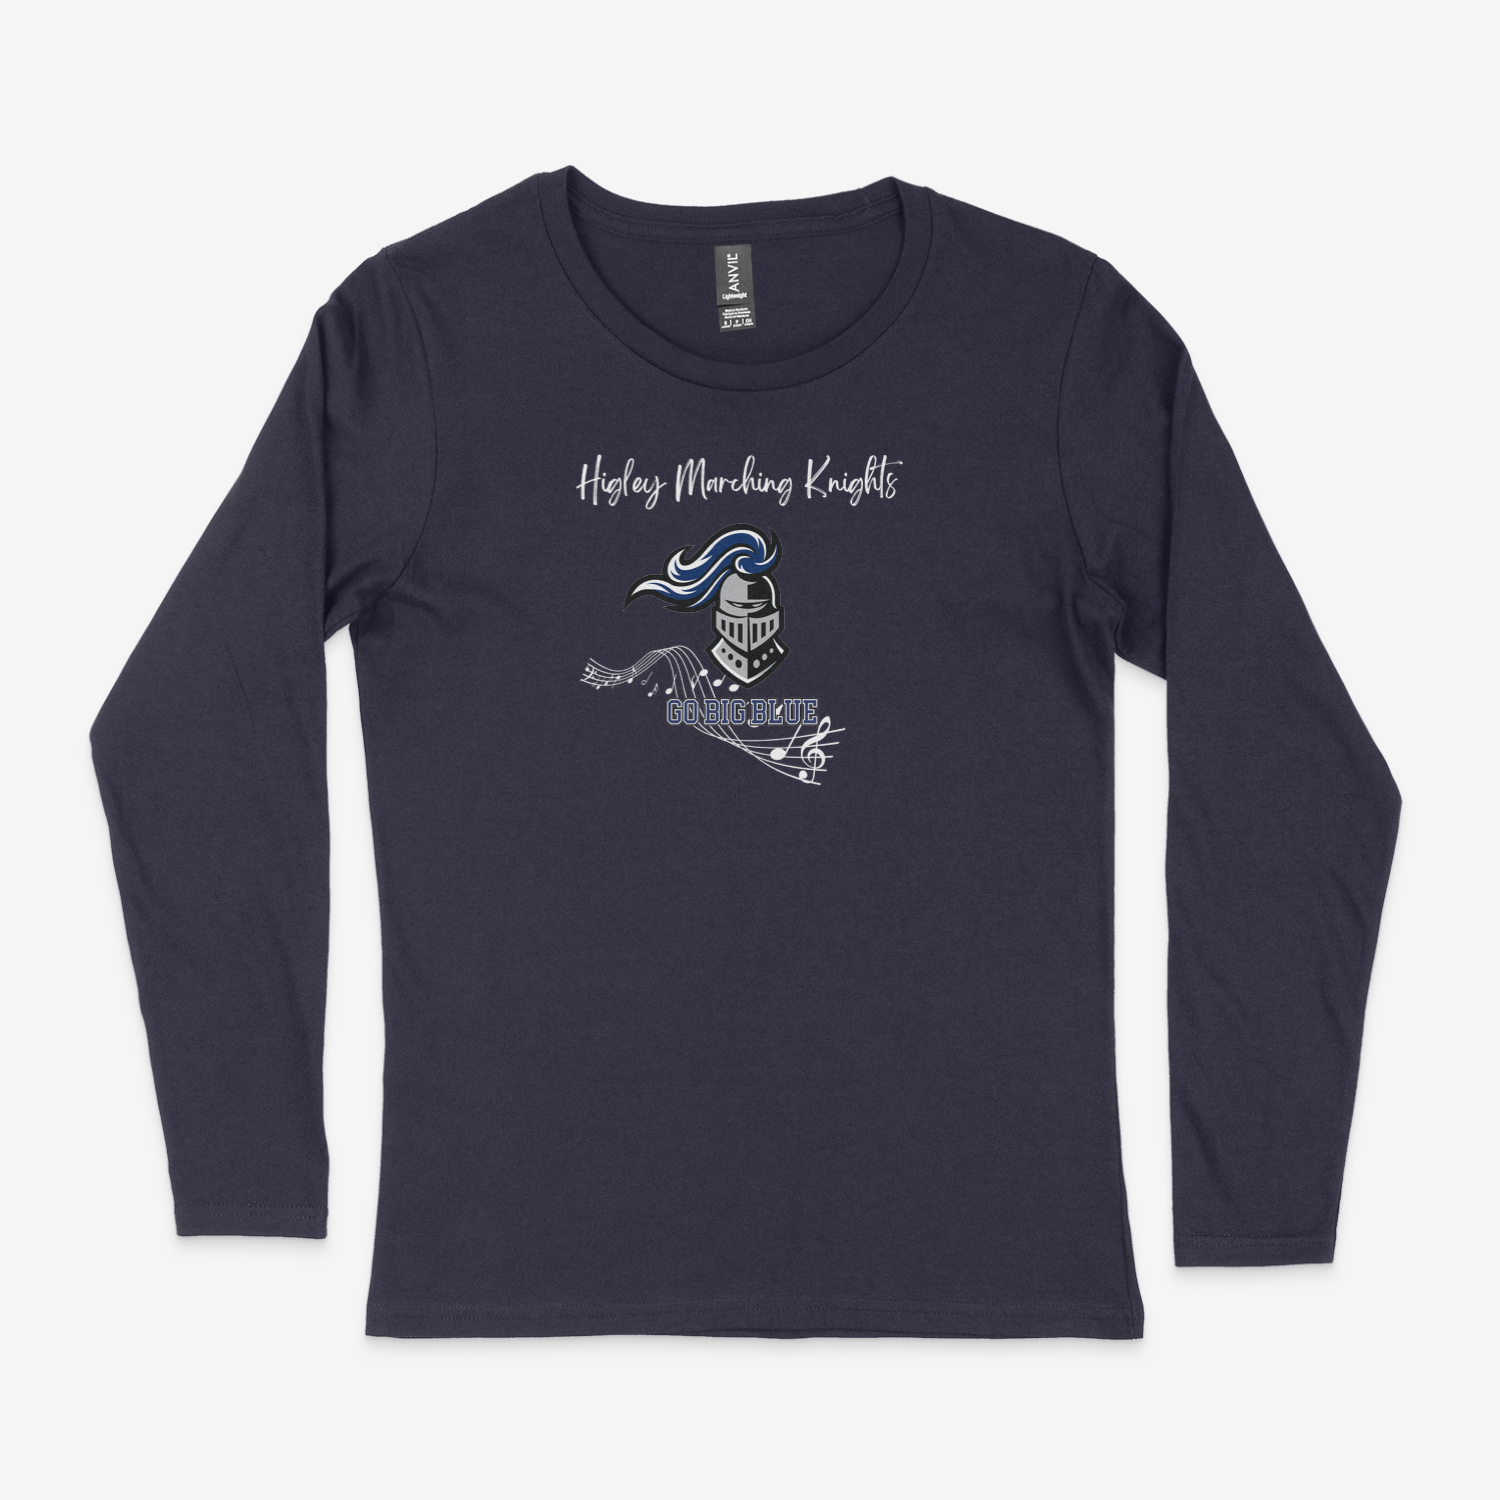 Higley Marching Knights Sleeve T-Shirt - Single Graphic